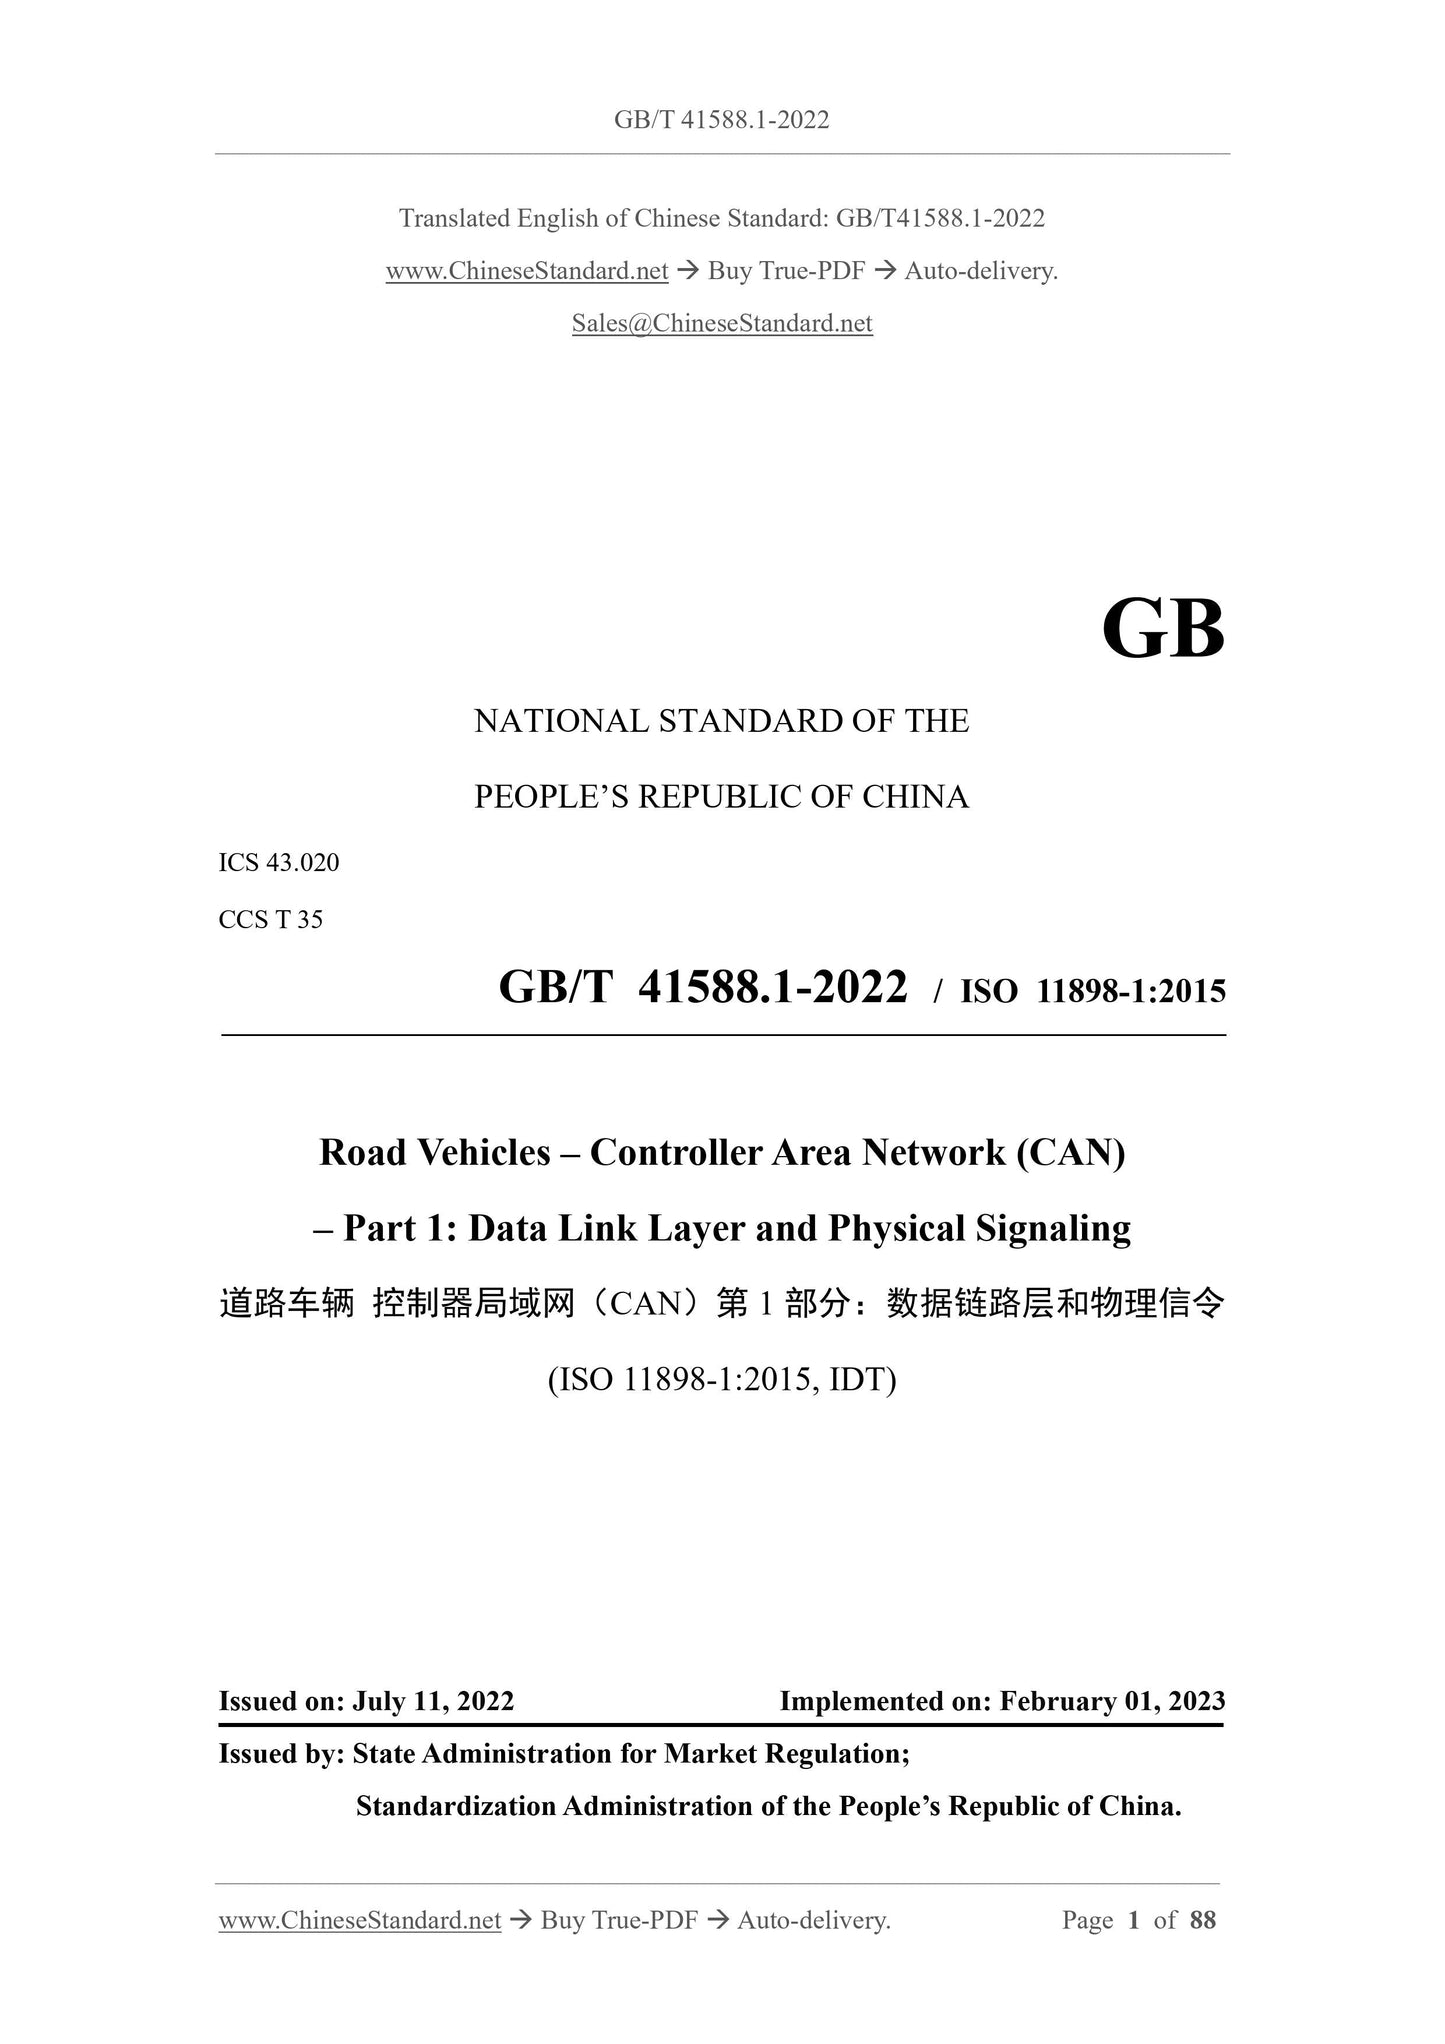 GB/T 41588.1-2022 Page 1